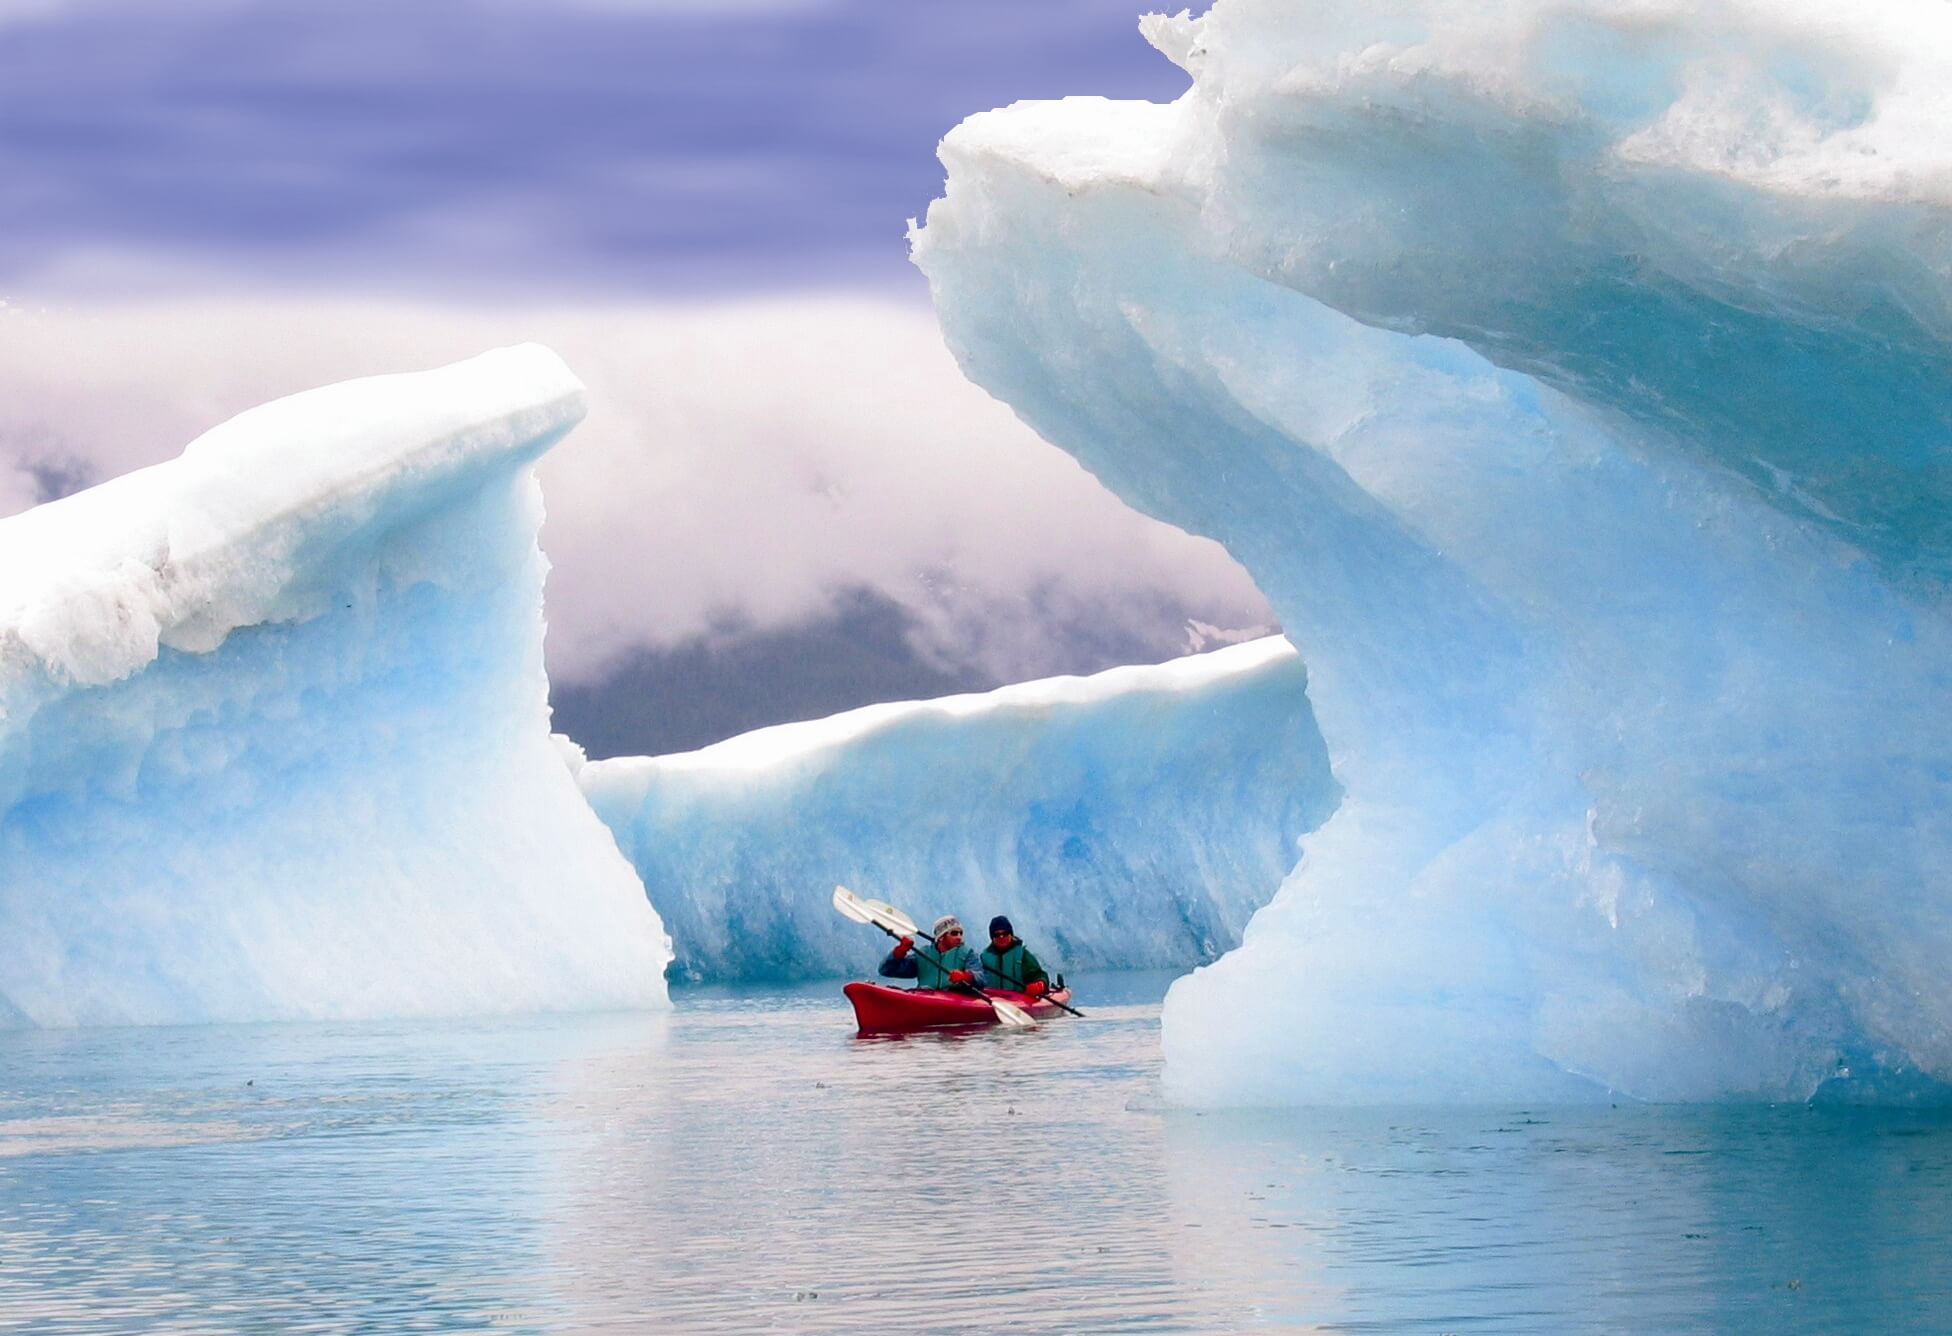 Two men kayaking on an expedition in Alaska, amongst two huge icebergs.